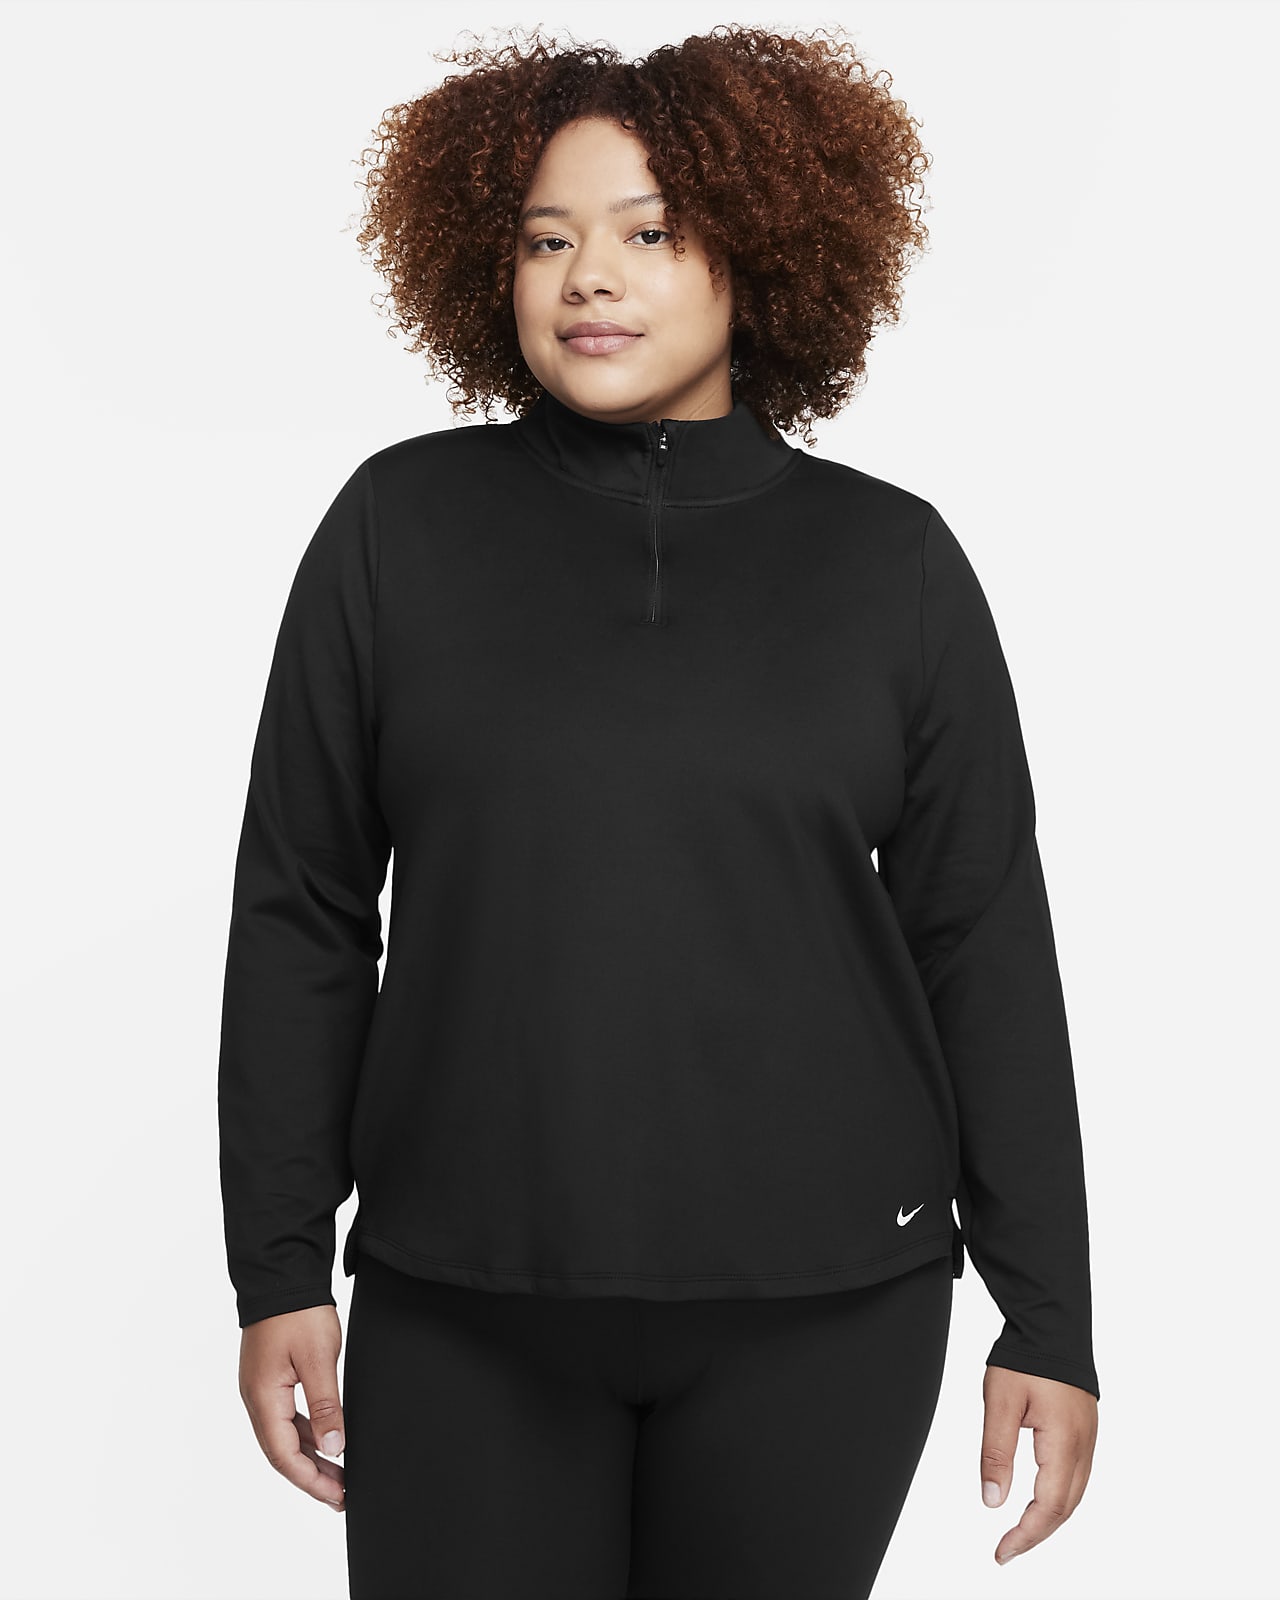 Nike Girls Therma Fit One Long Sleeve Top - White/Black